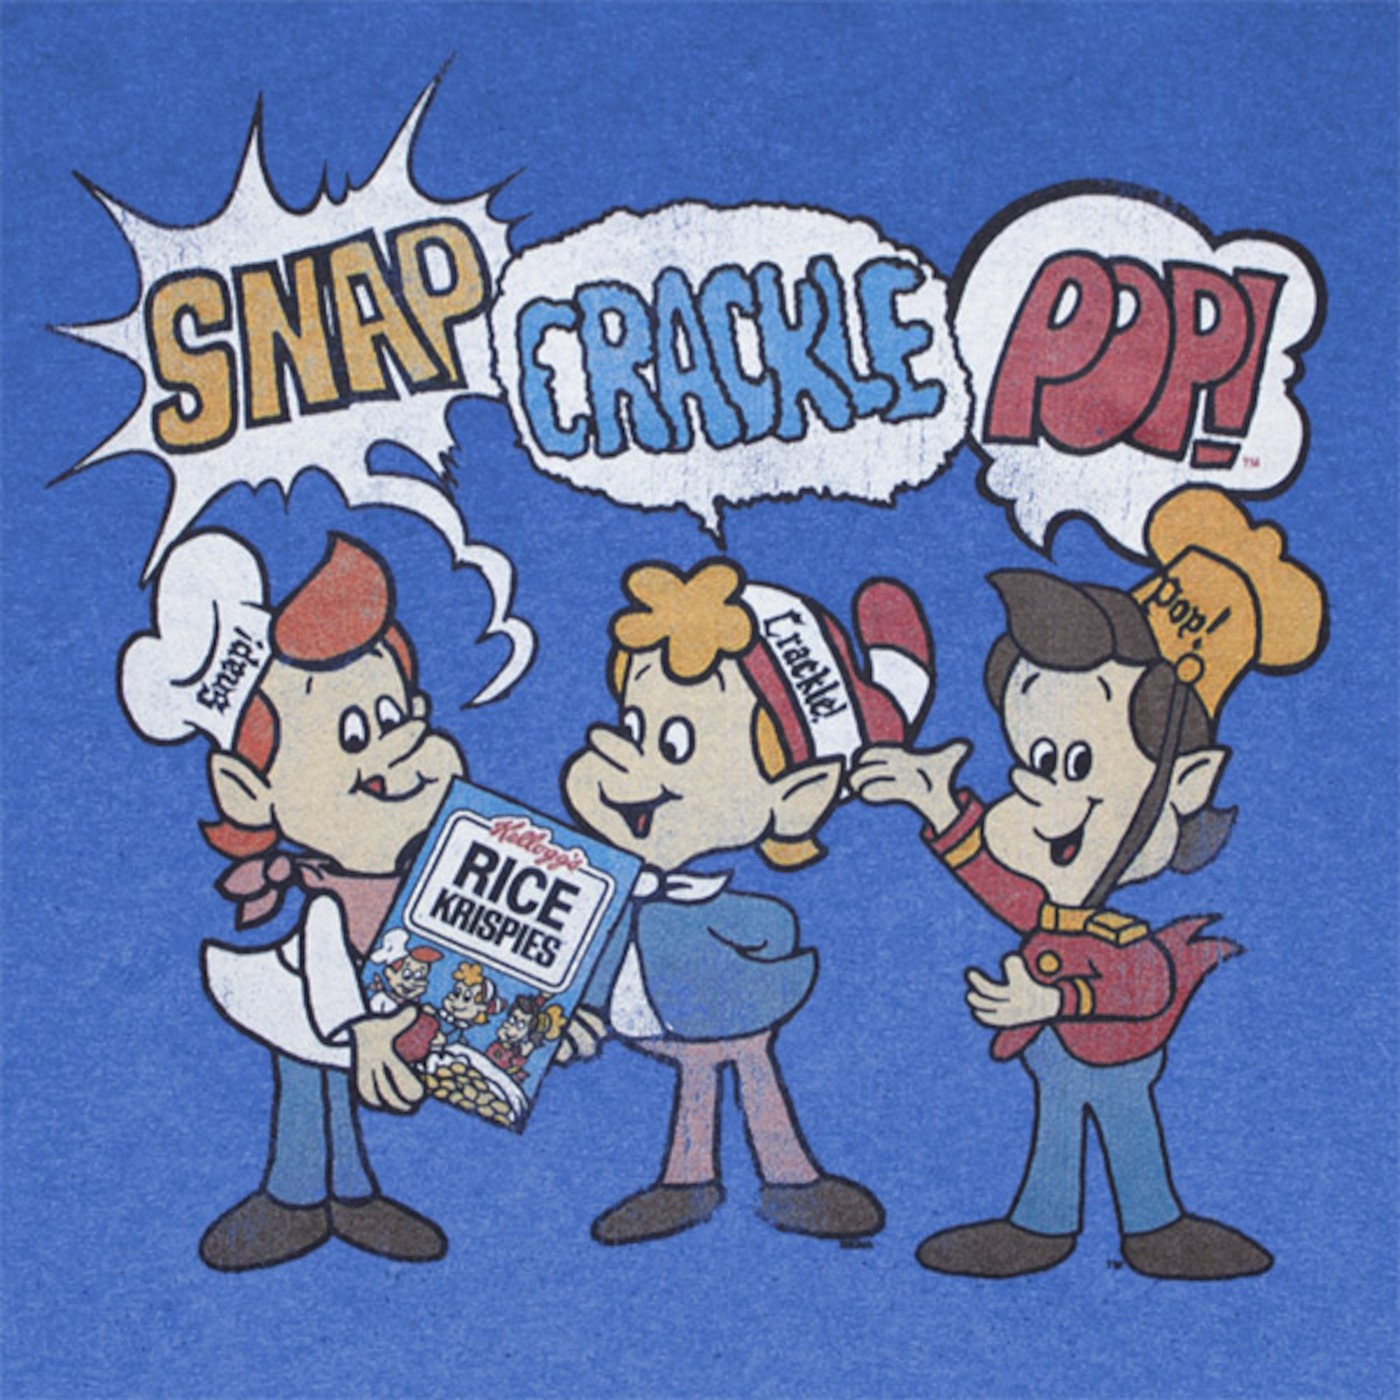 Episode 2 - Snap, Crackle and Pop